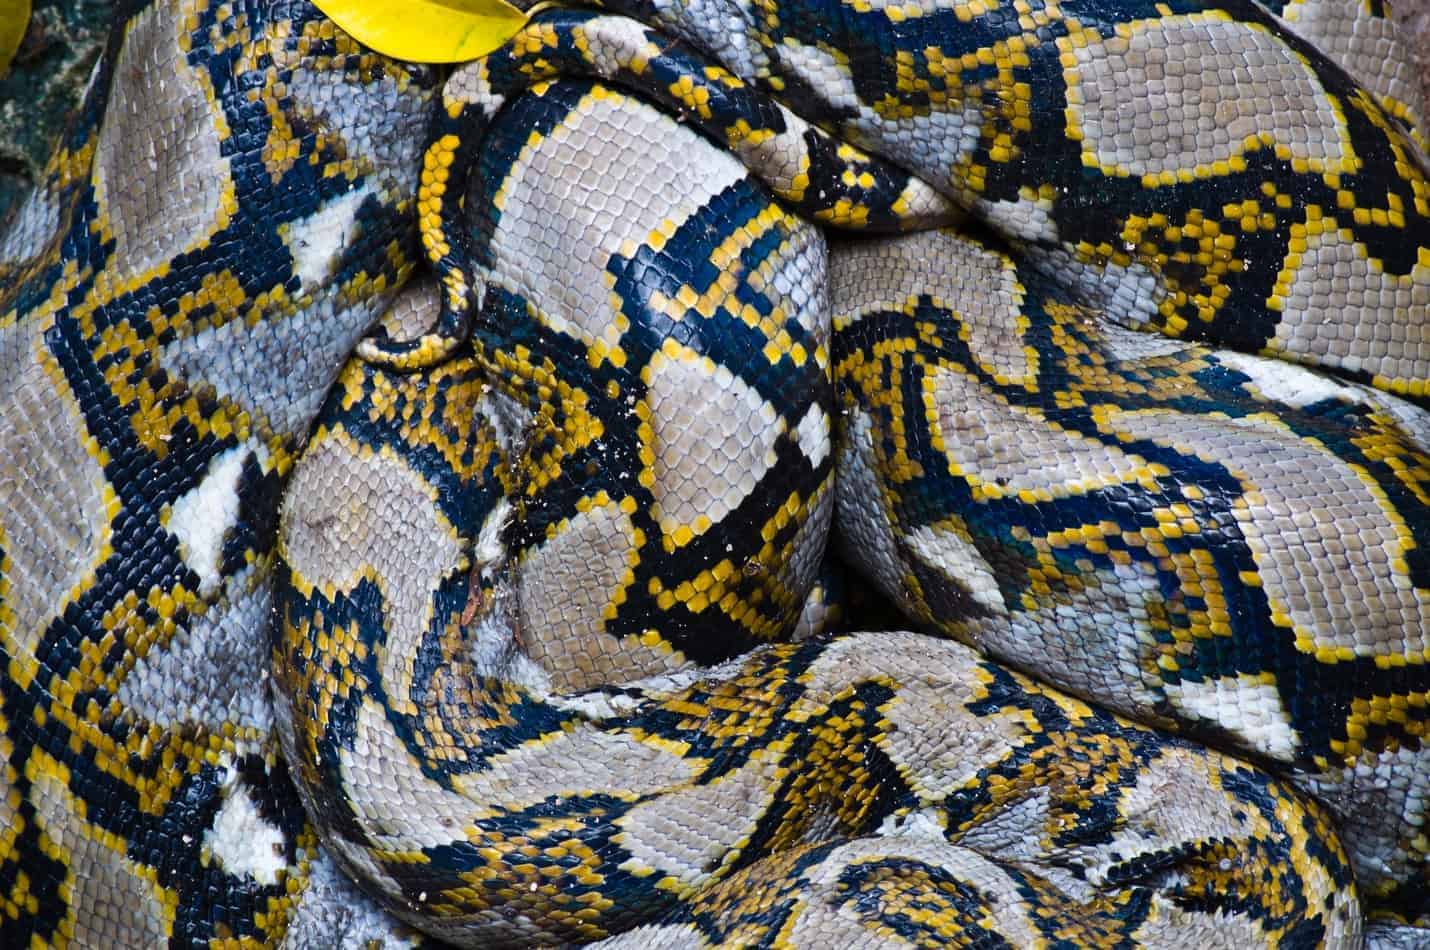 27 interesting facts about boa constrictors 4 27 Interesting Facts About Boa Constrictors (With Pictures)